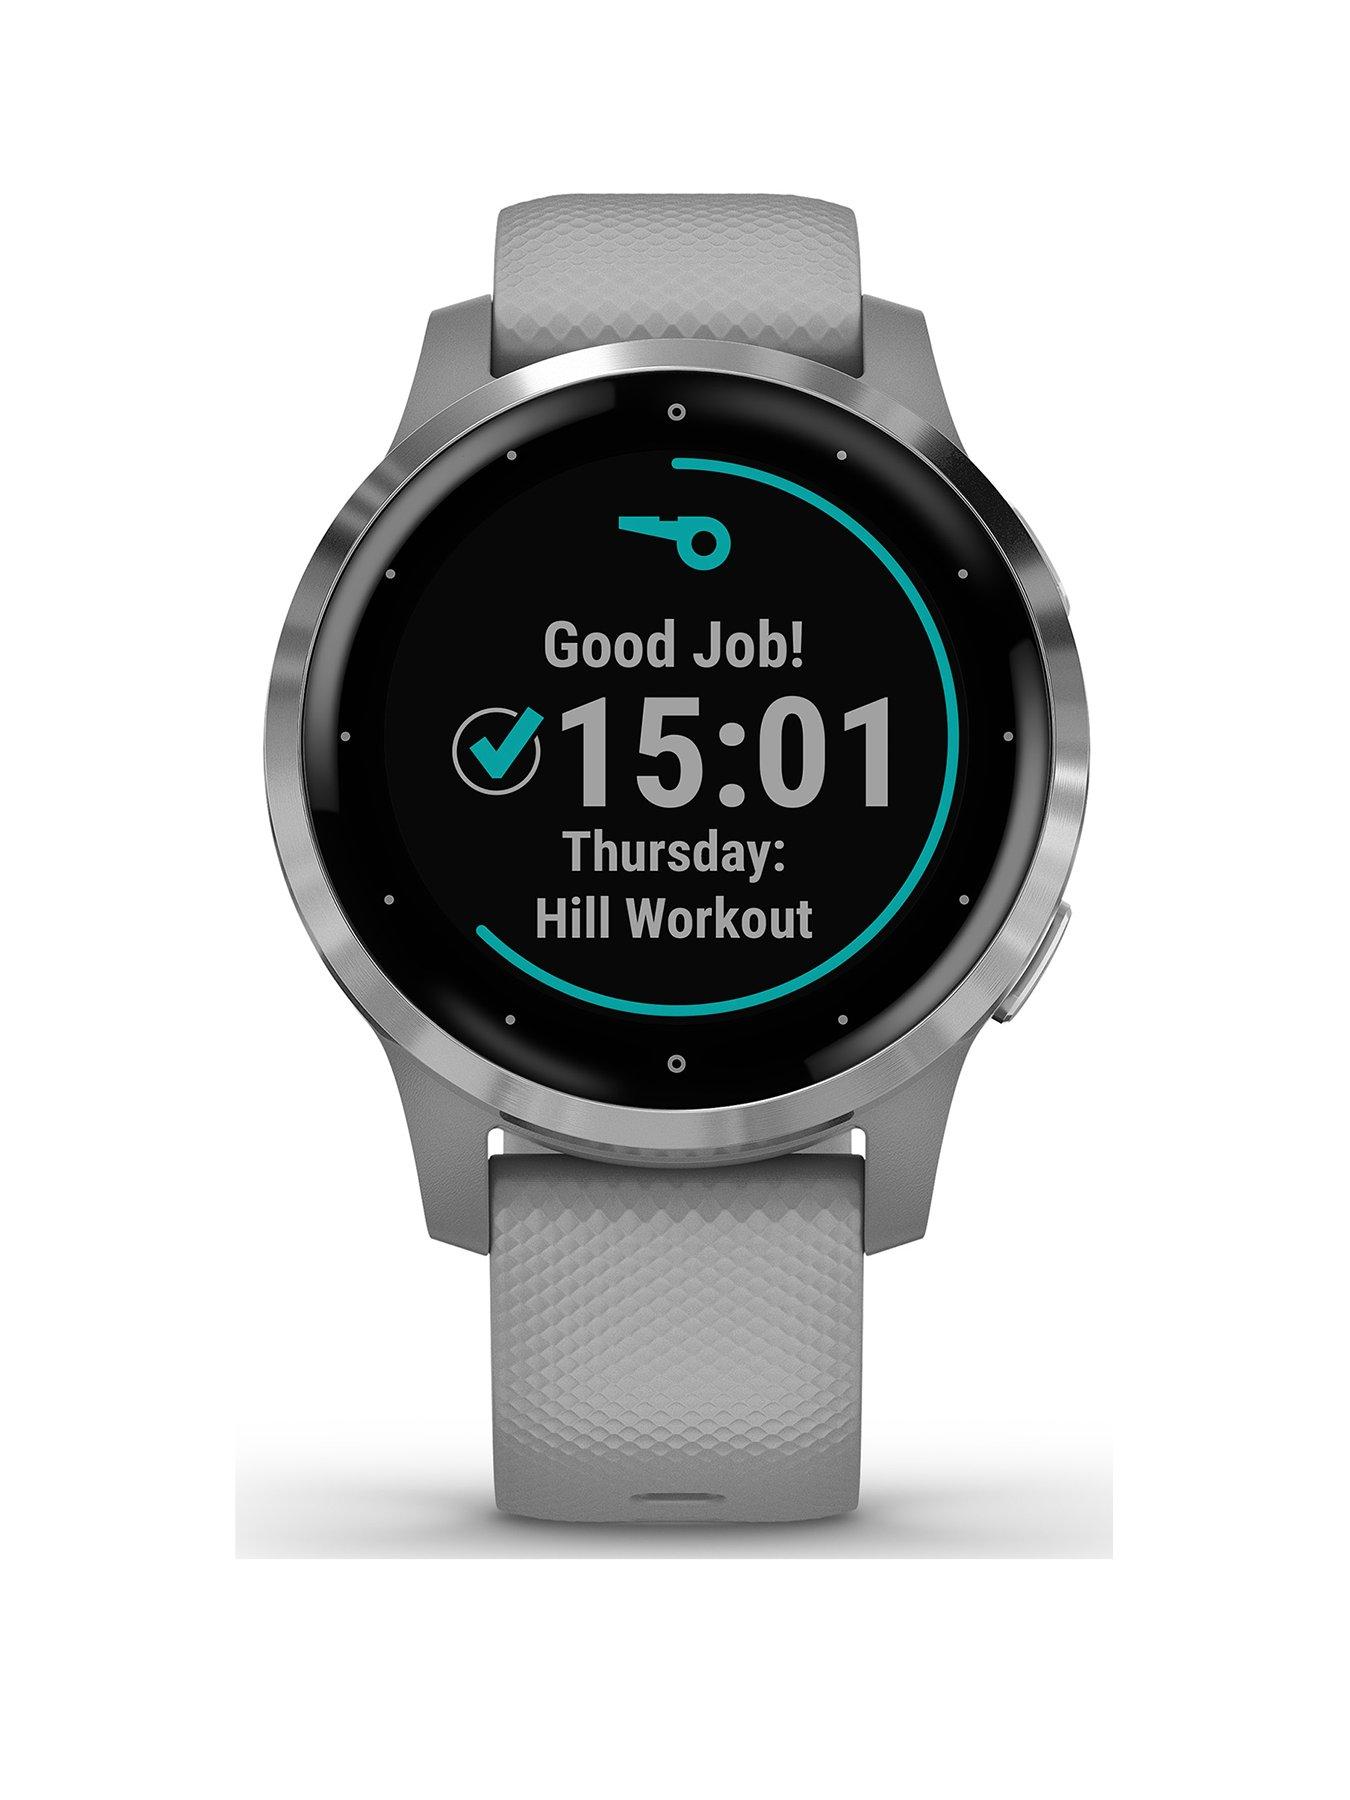 Garmin Vivoactive 4s review: So many fitness features, so little